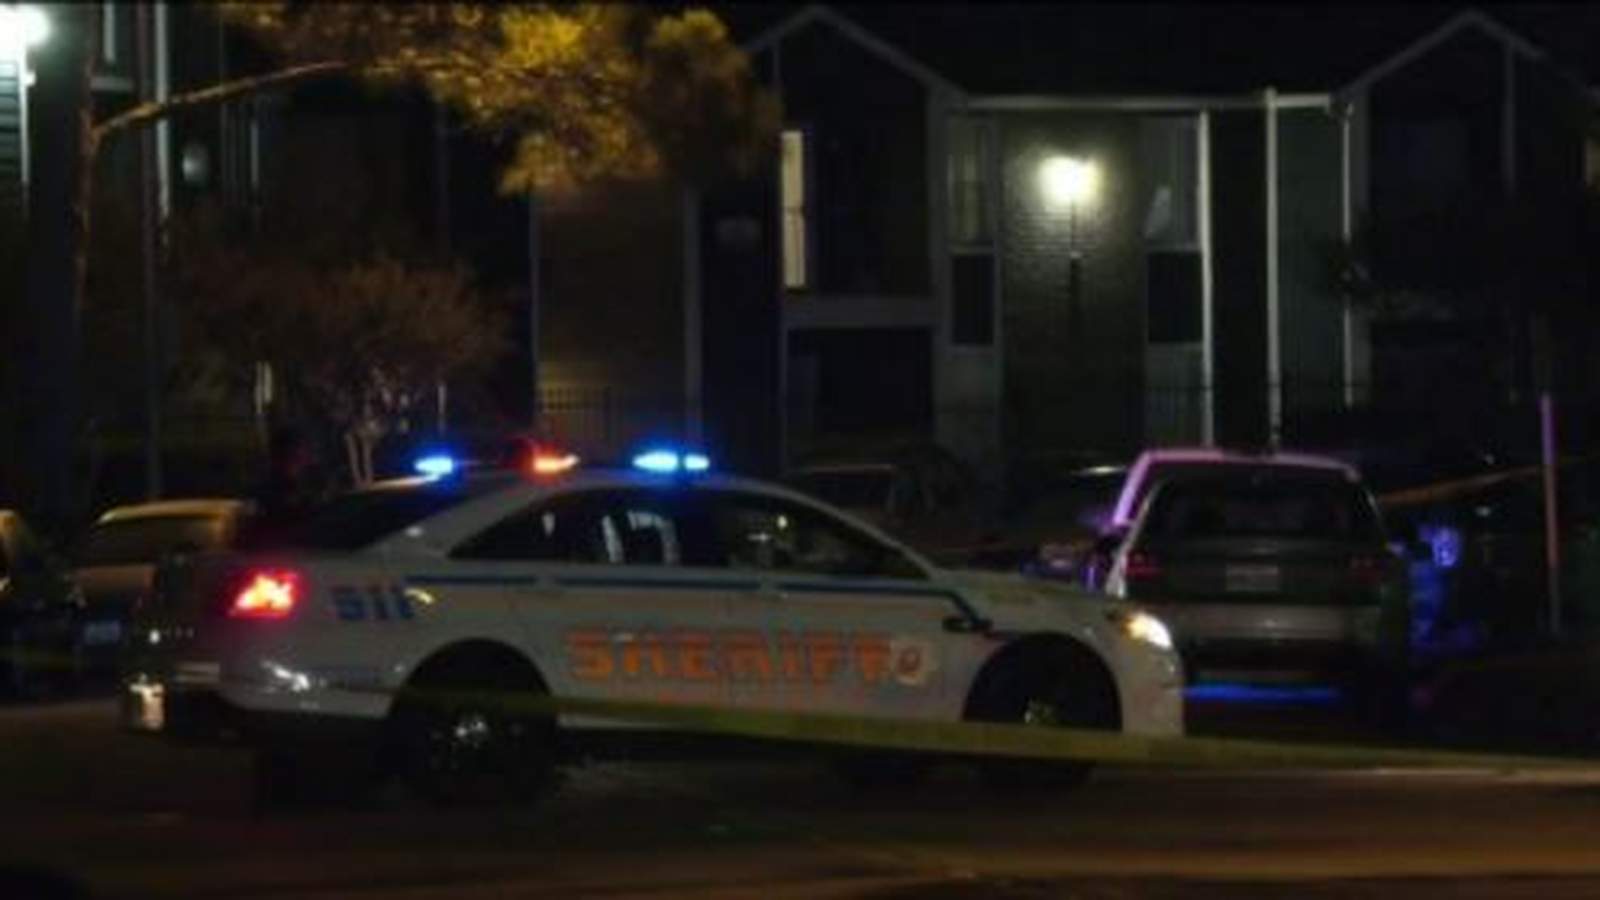 2 men shot at apartment complex in NW Harris County after returning from club, 1 dead: HCSO